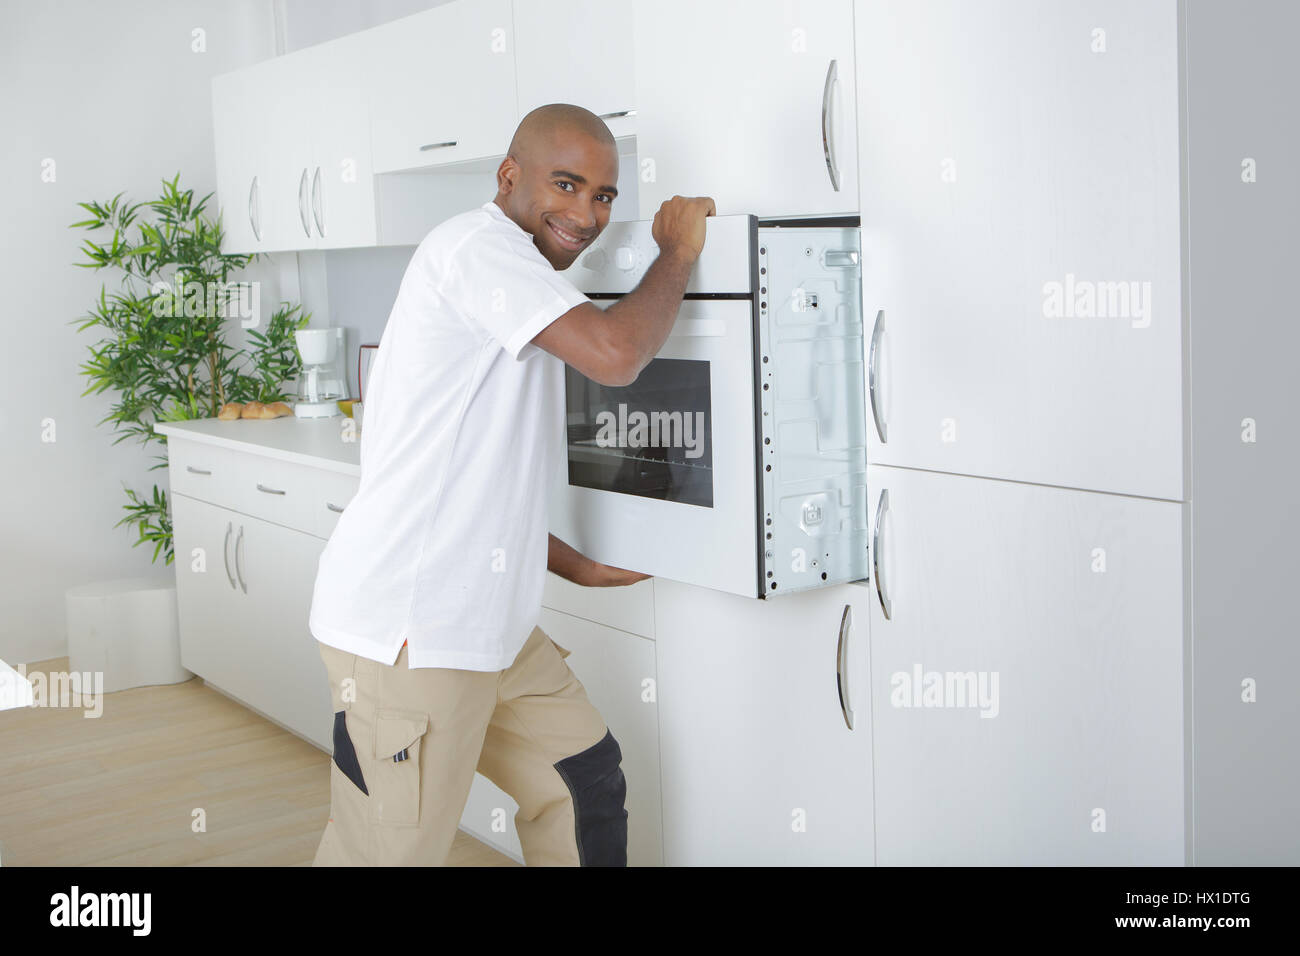 worker installing modern built-in oven in kitchen Stock Photo